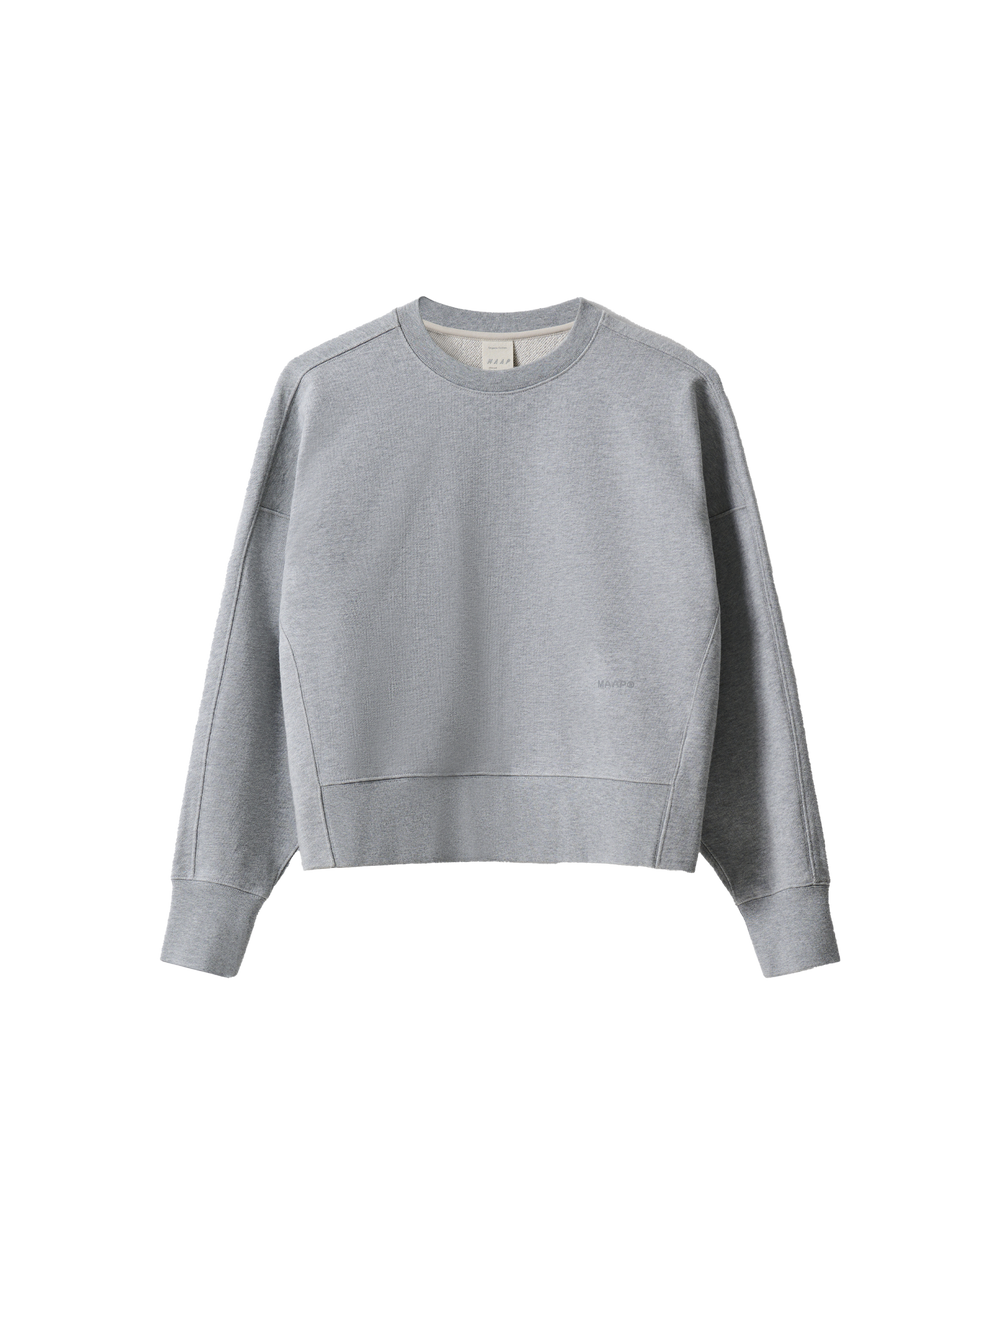 Product Image for Women's Essentials Crew